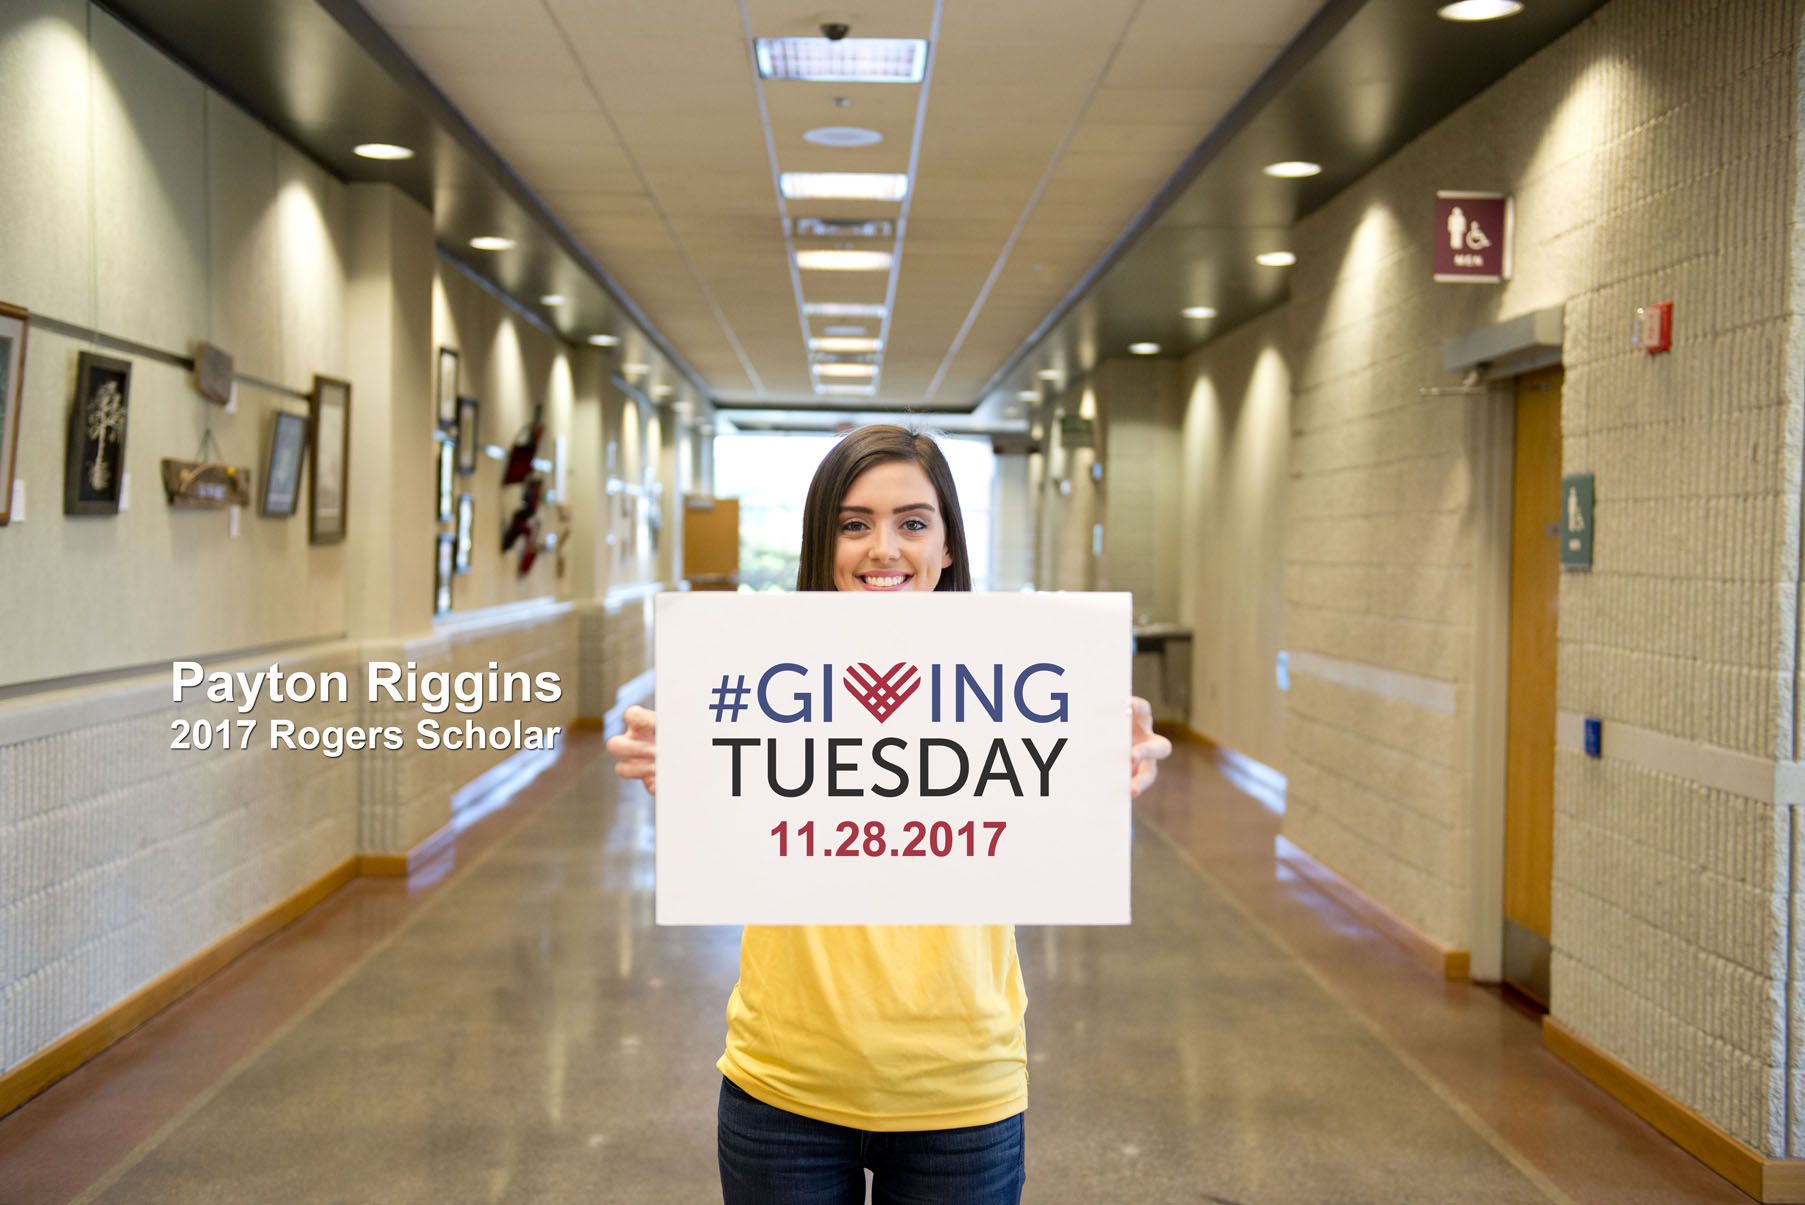 Support our youth on #GivingTuesday